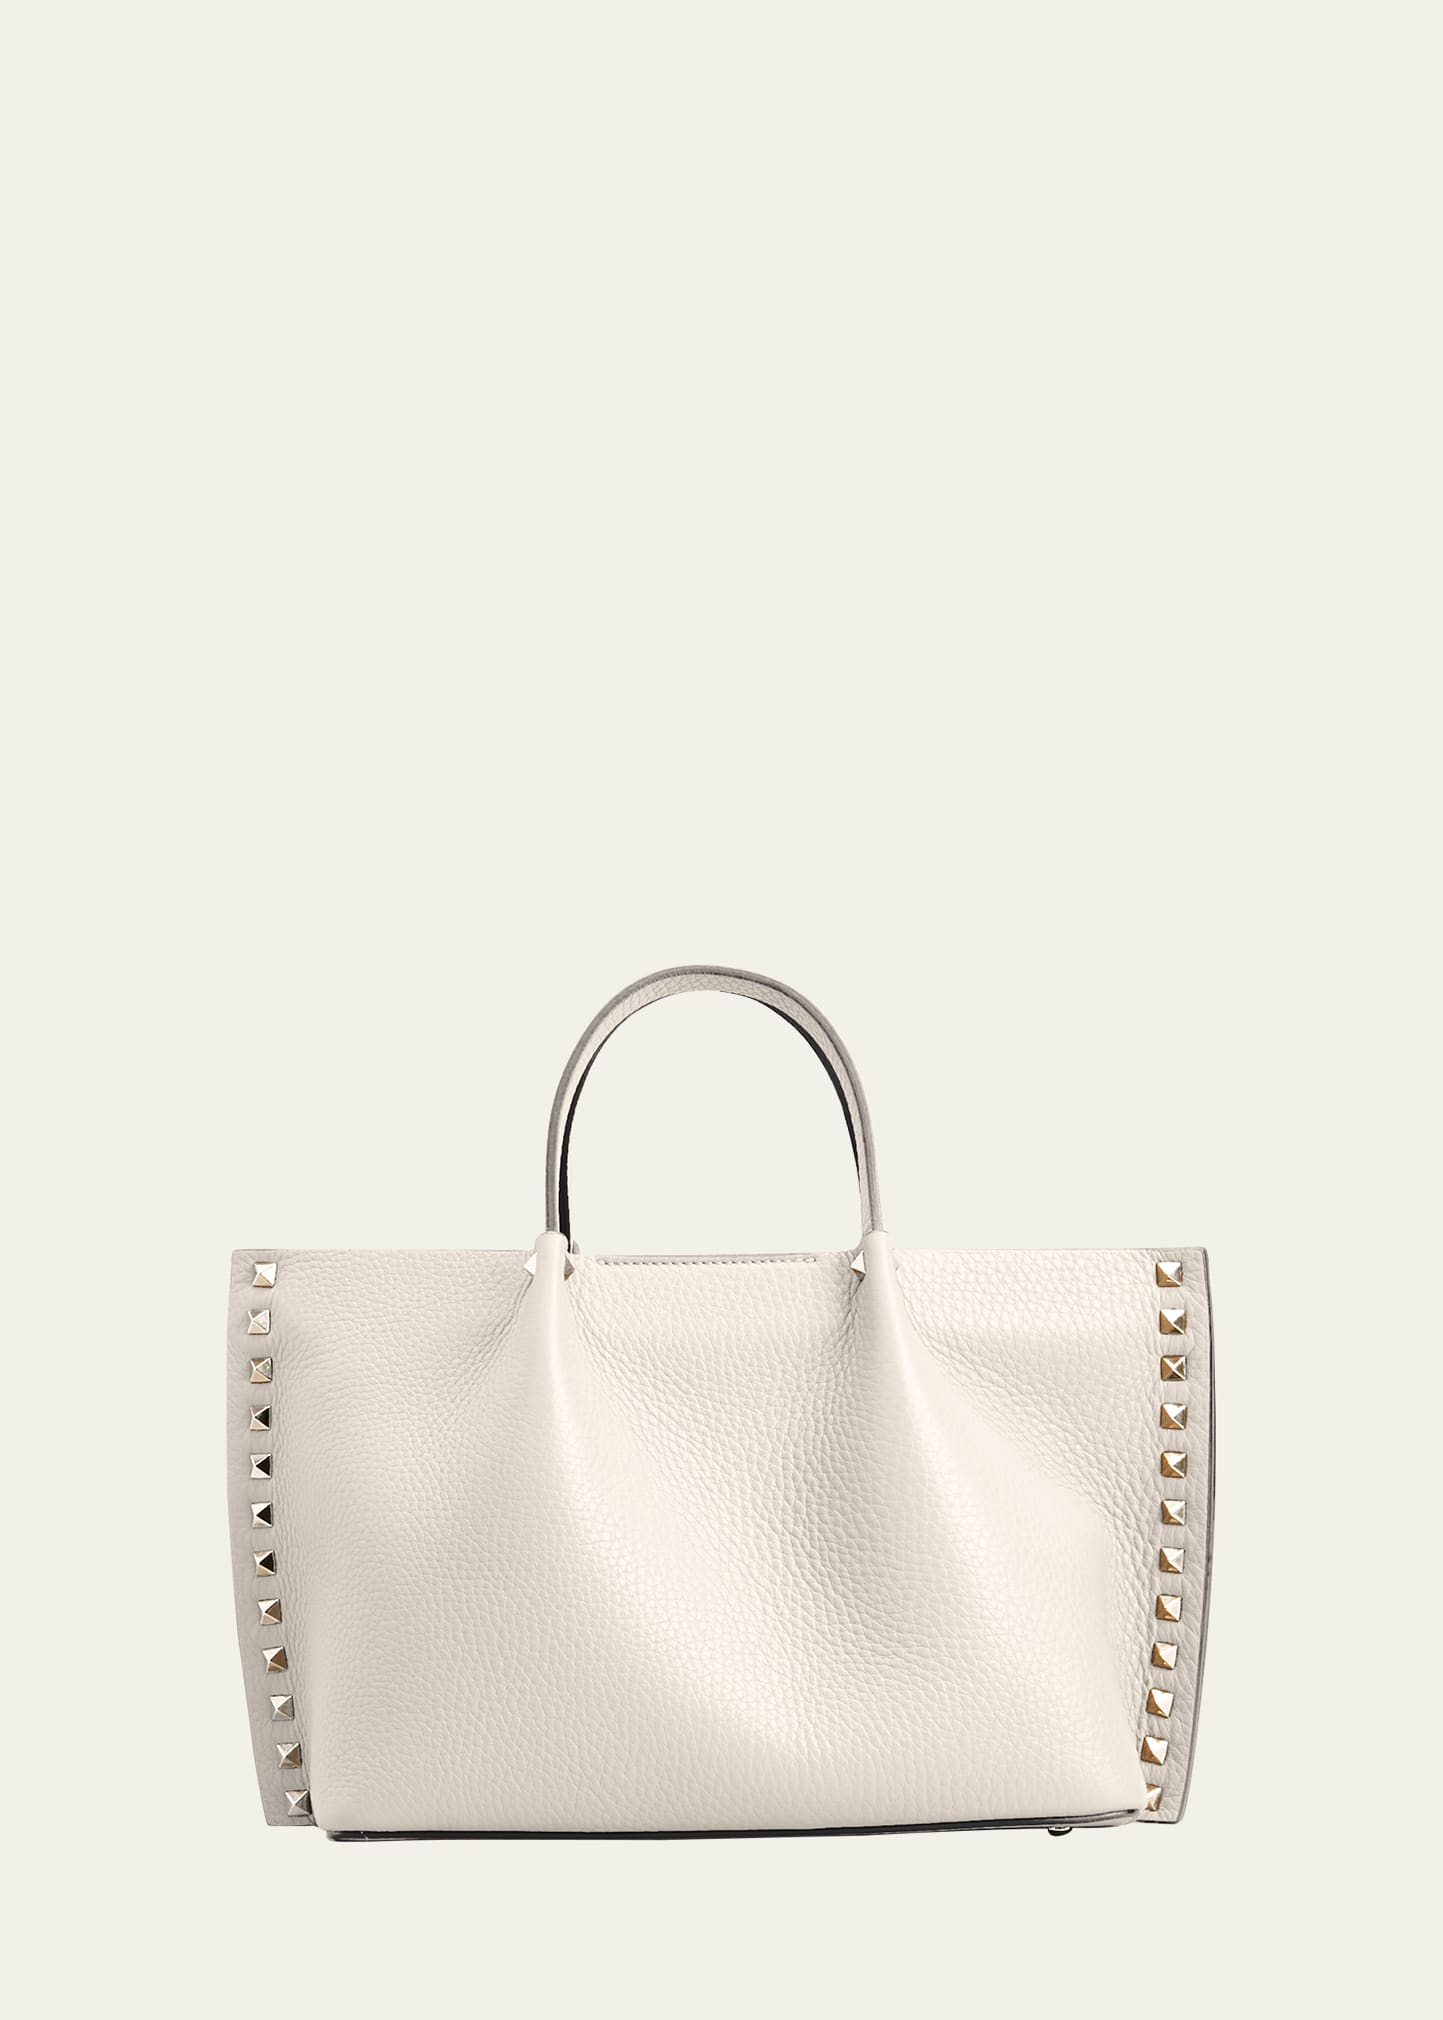 Rockstud Small East-West Leather Tote Bag